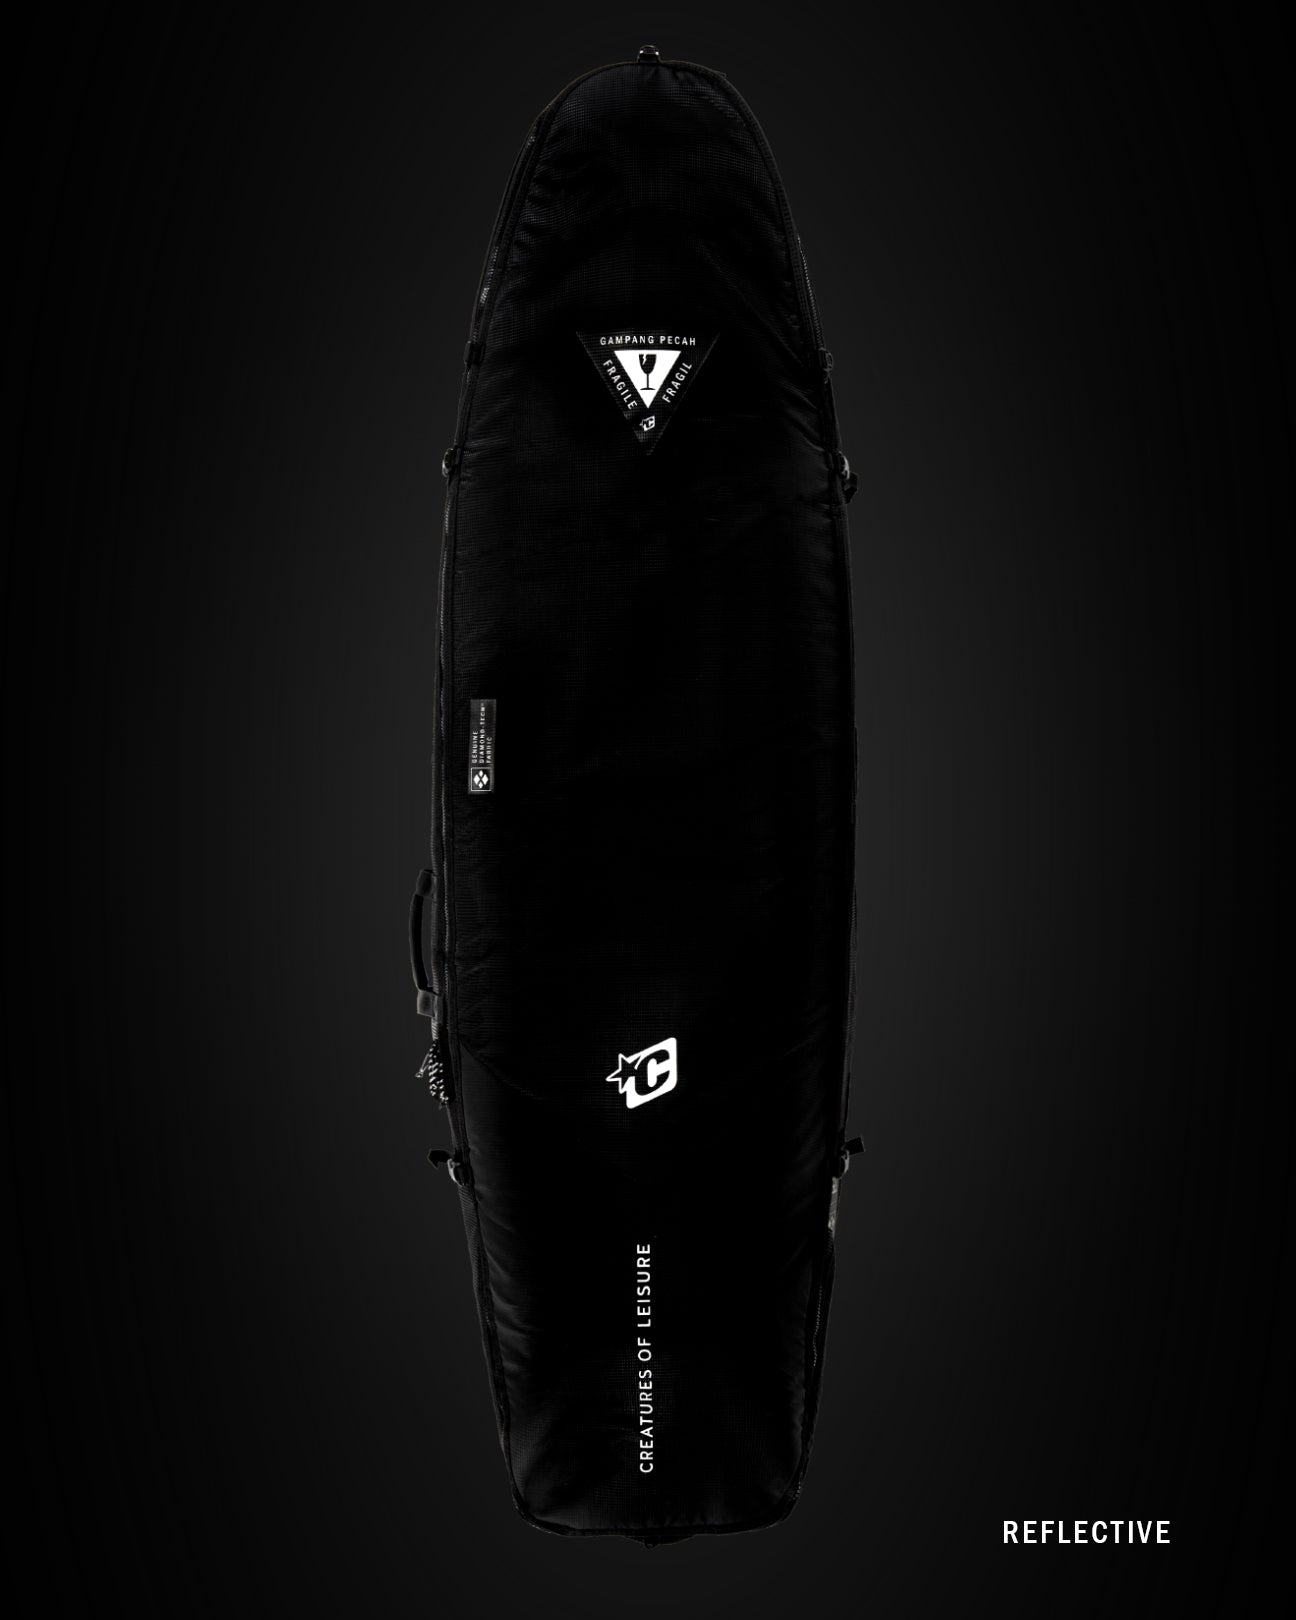 FUNBOARD ALL ROUNDER DT : BLACK / SILVER